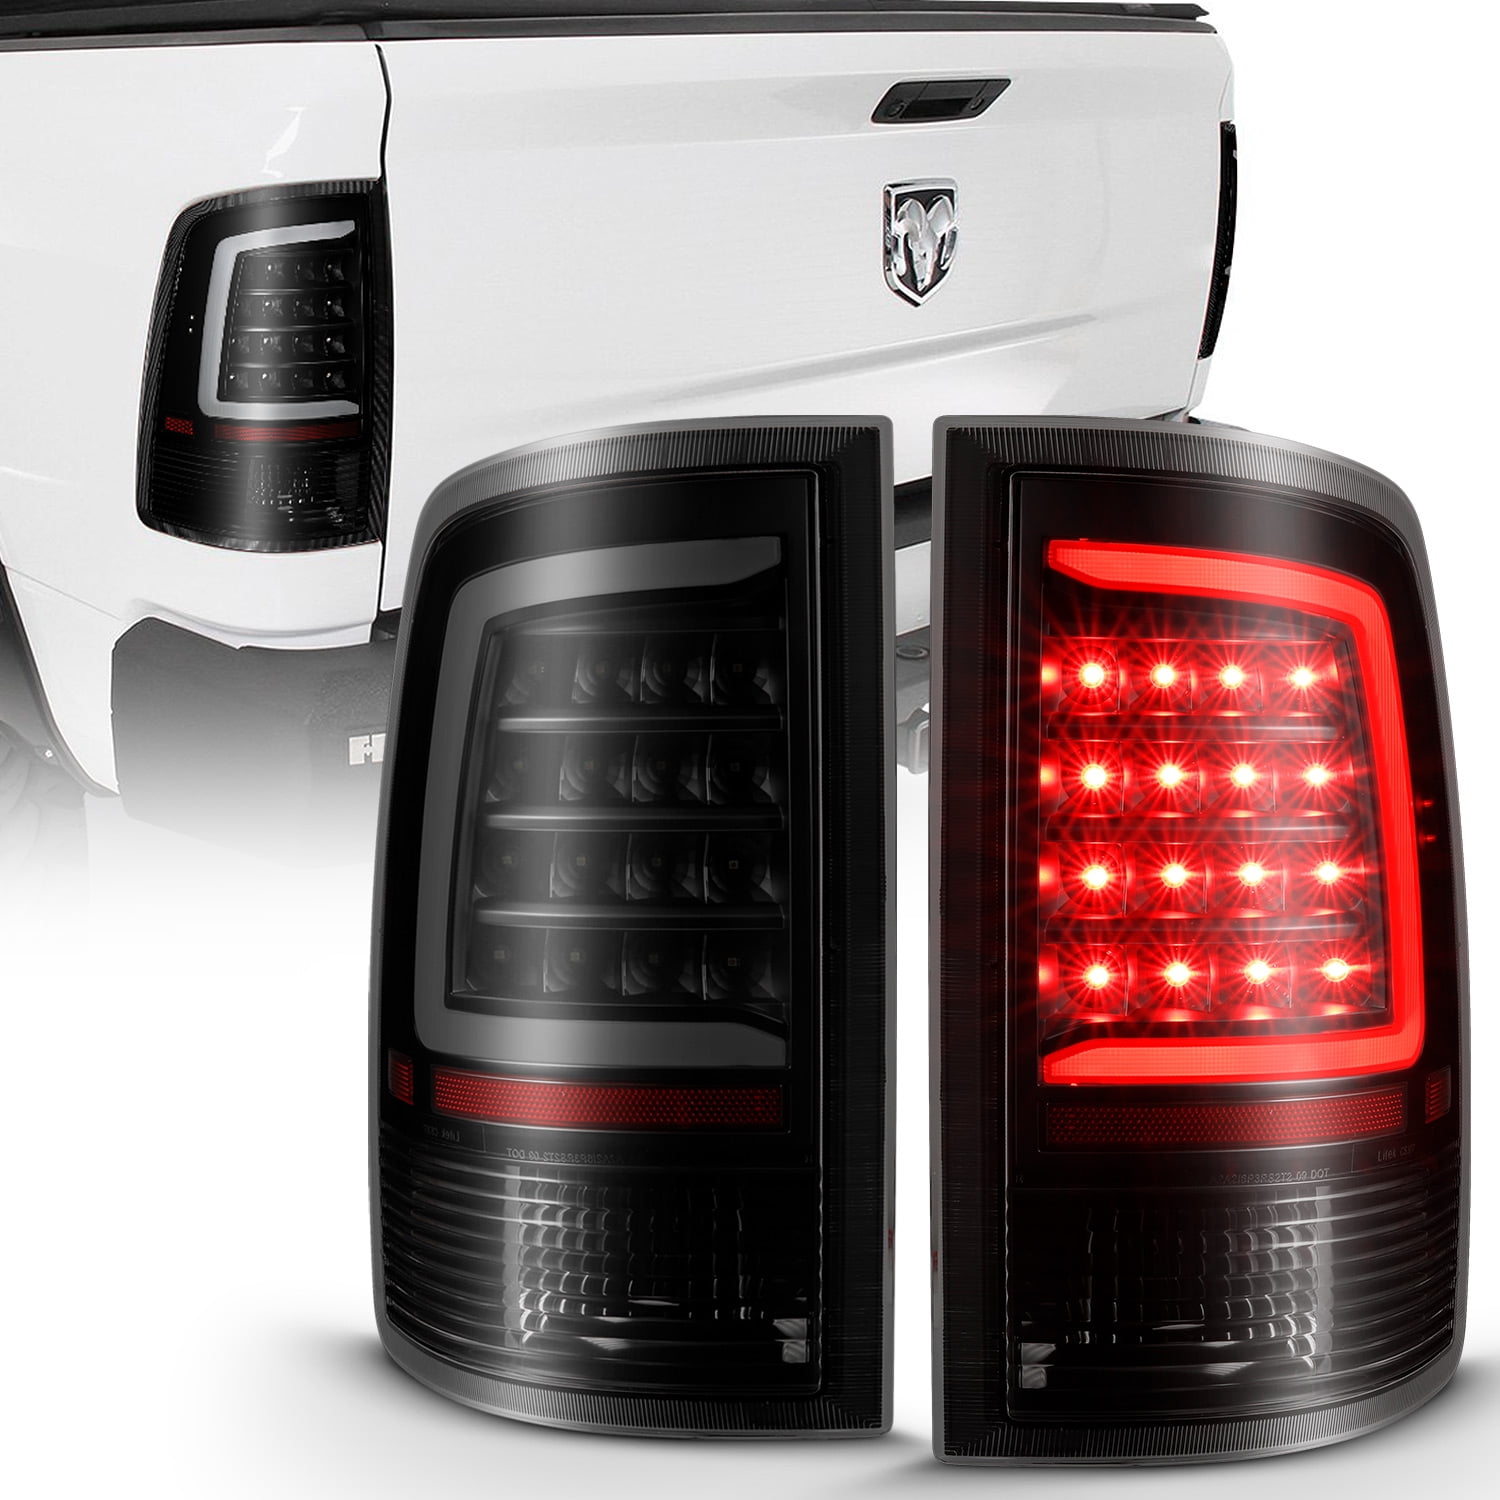 CAPA Set of 2 Passenger and Driver Side Tail Light Assembly Compatible with 2009-2010 Dodge Ram 1500 Standard Type 